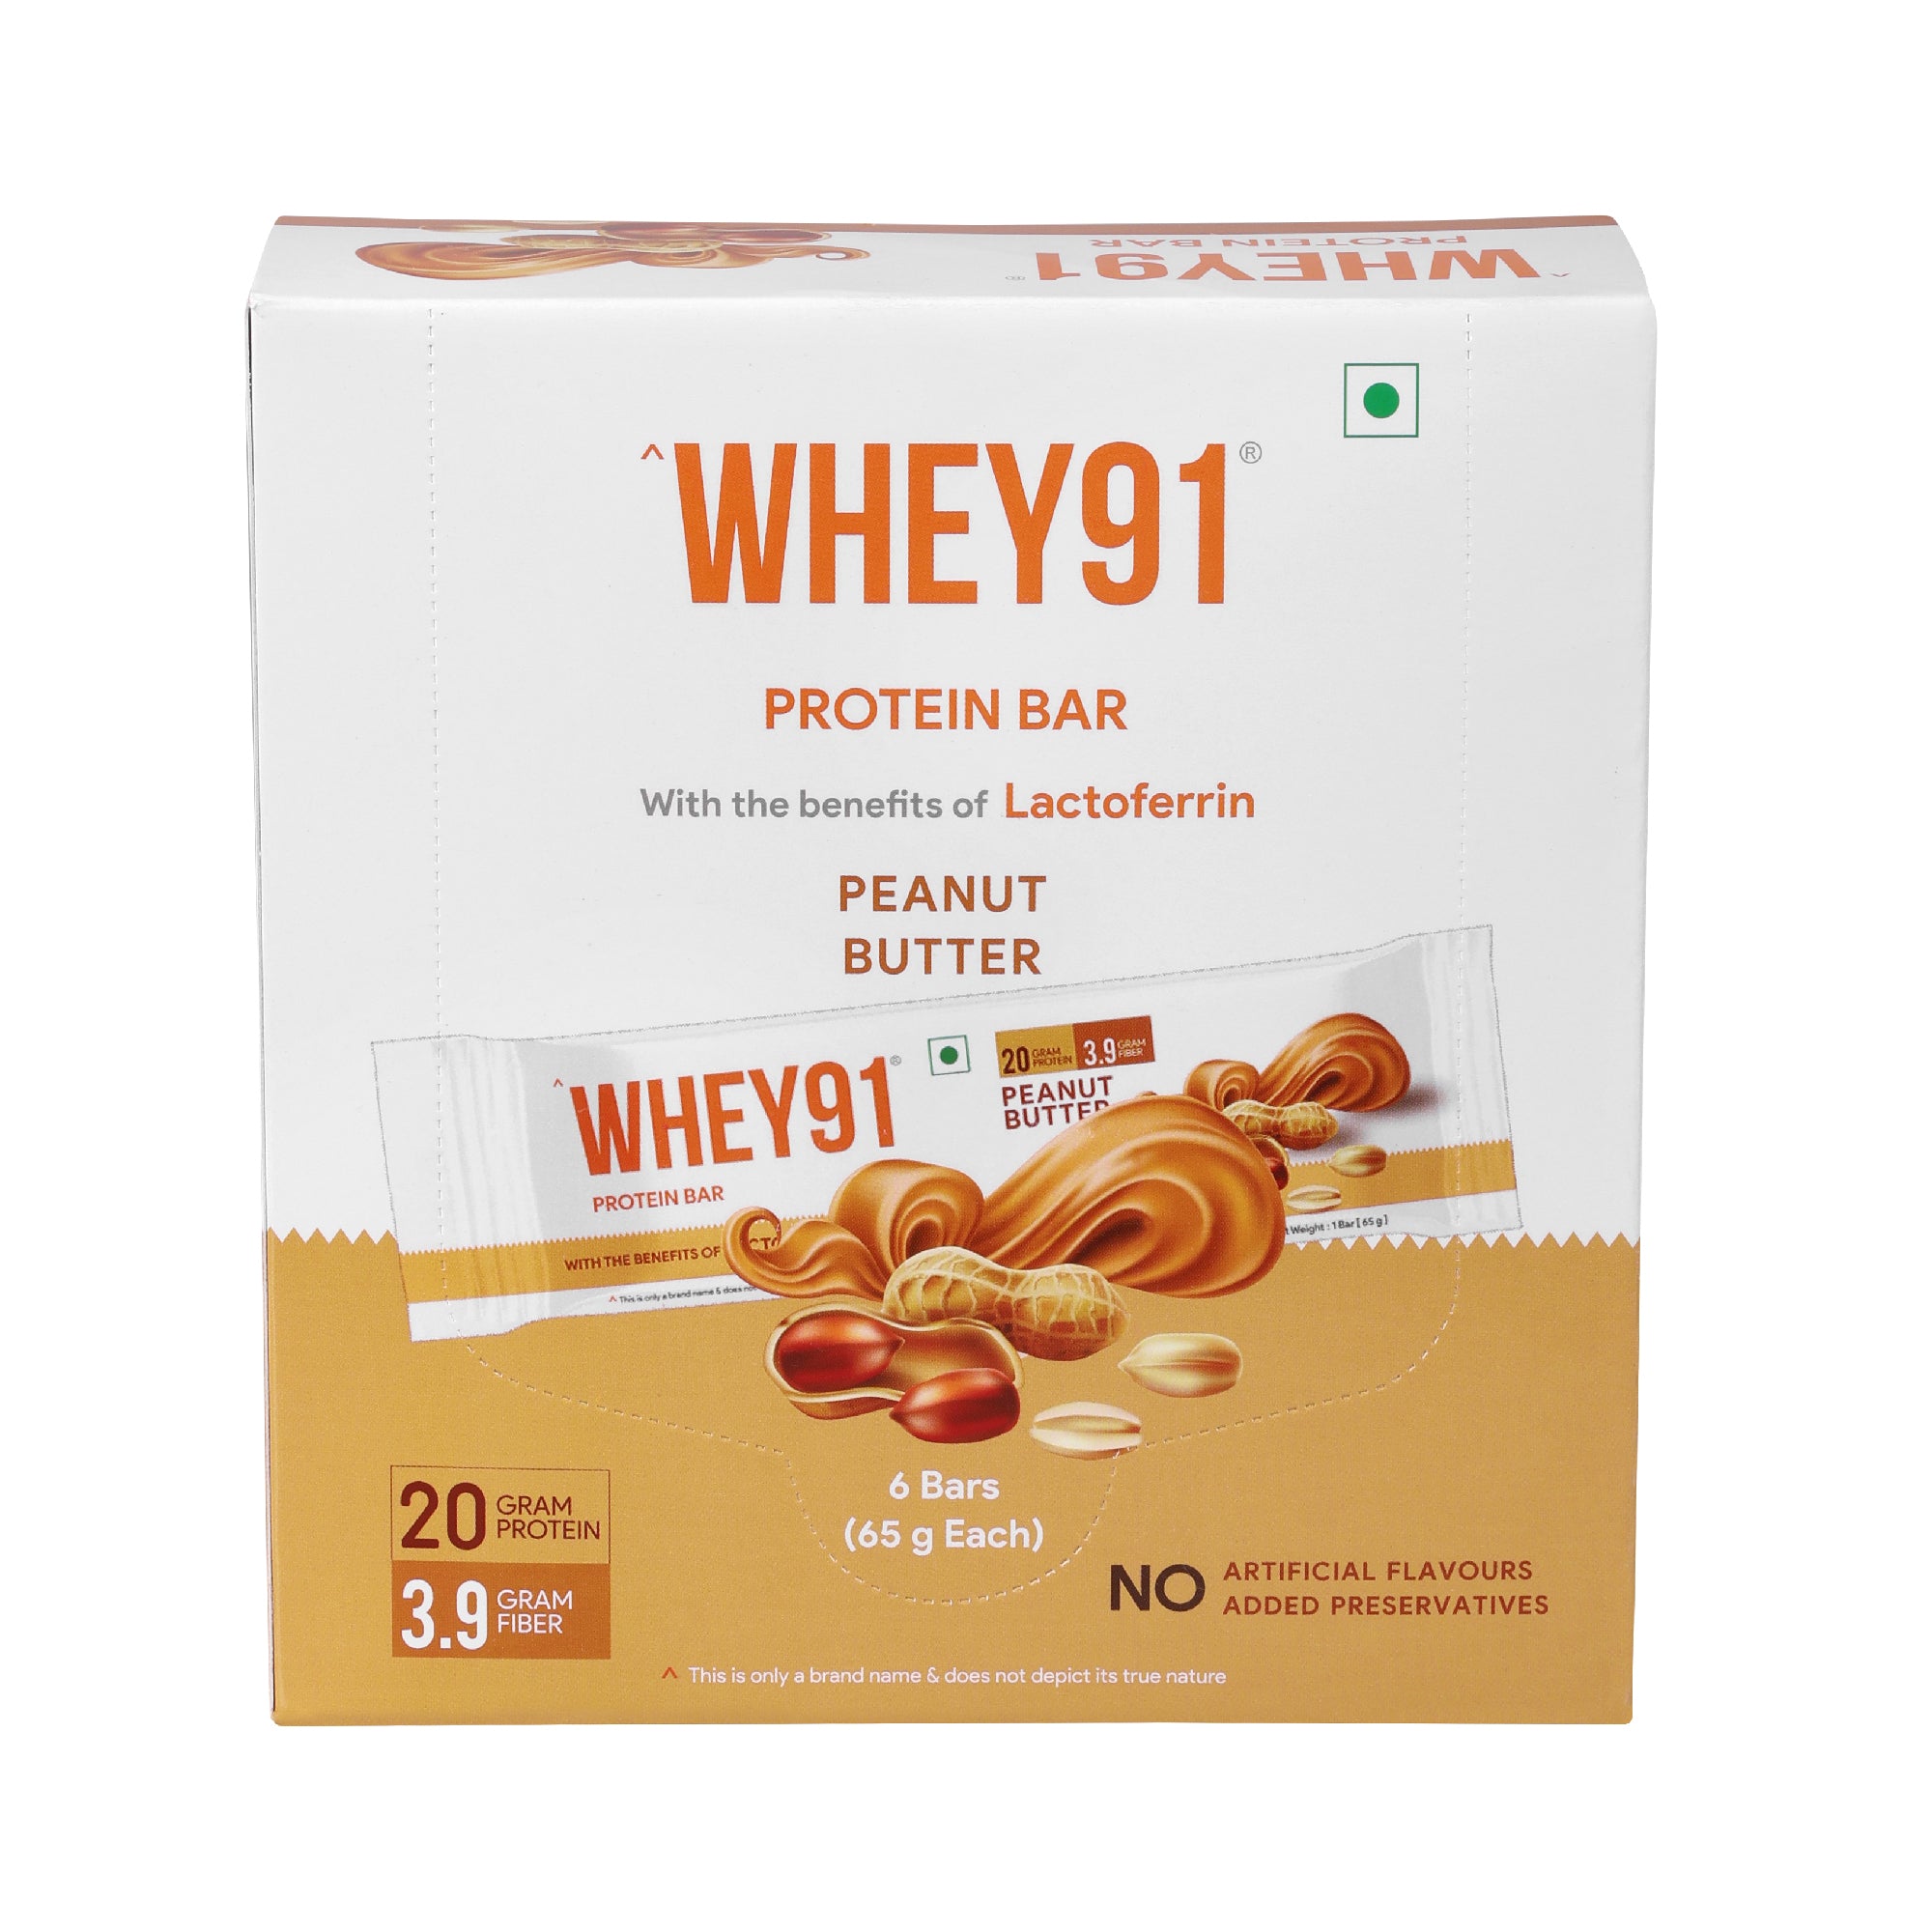 Whey91 Peanut Butter Protein Bar | 20g Protein & 3.9g Fibre per Bar | Immunity Booster Lactoferrin | No Artificial Flavours | (Pack of 6 Bars) 390g